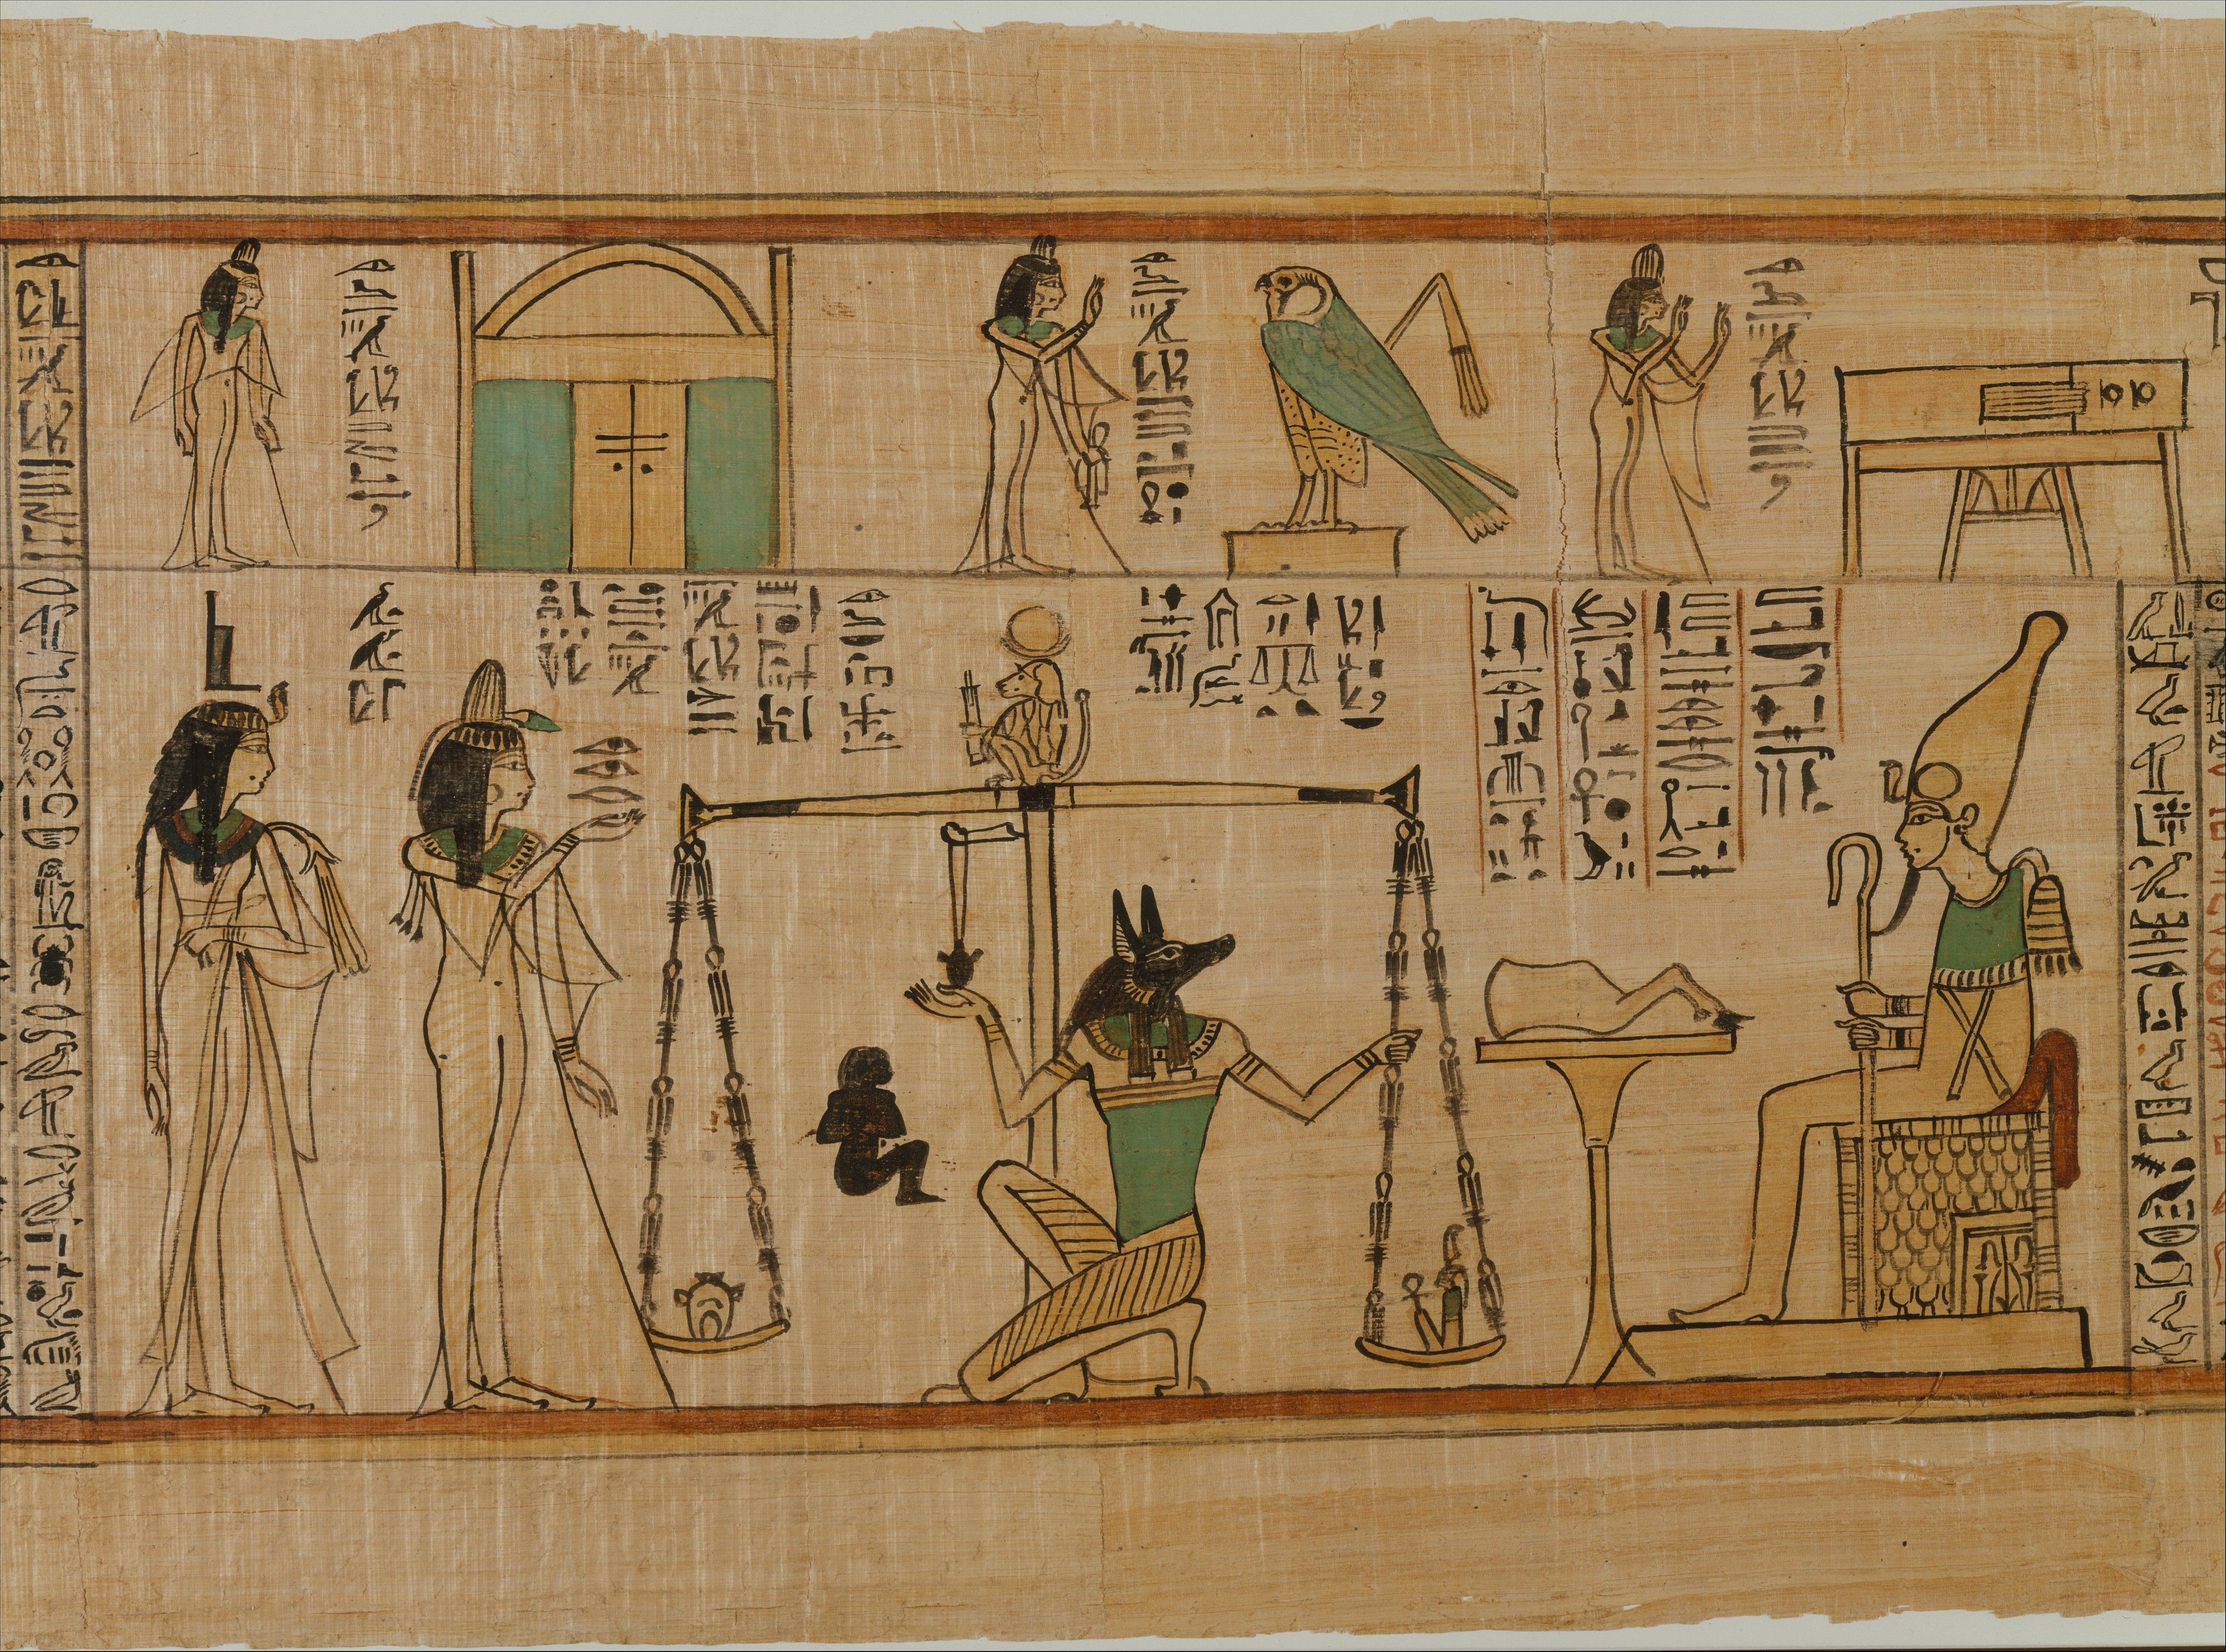 Book of the Dead for the Chantress of Amun, Nauny, 1050 B.C., The Metropolitan Museum of Art.